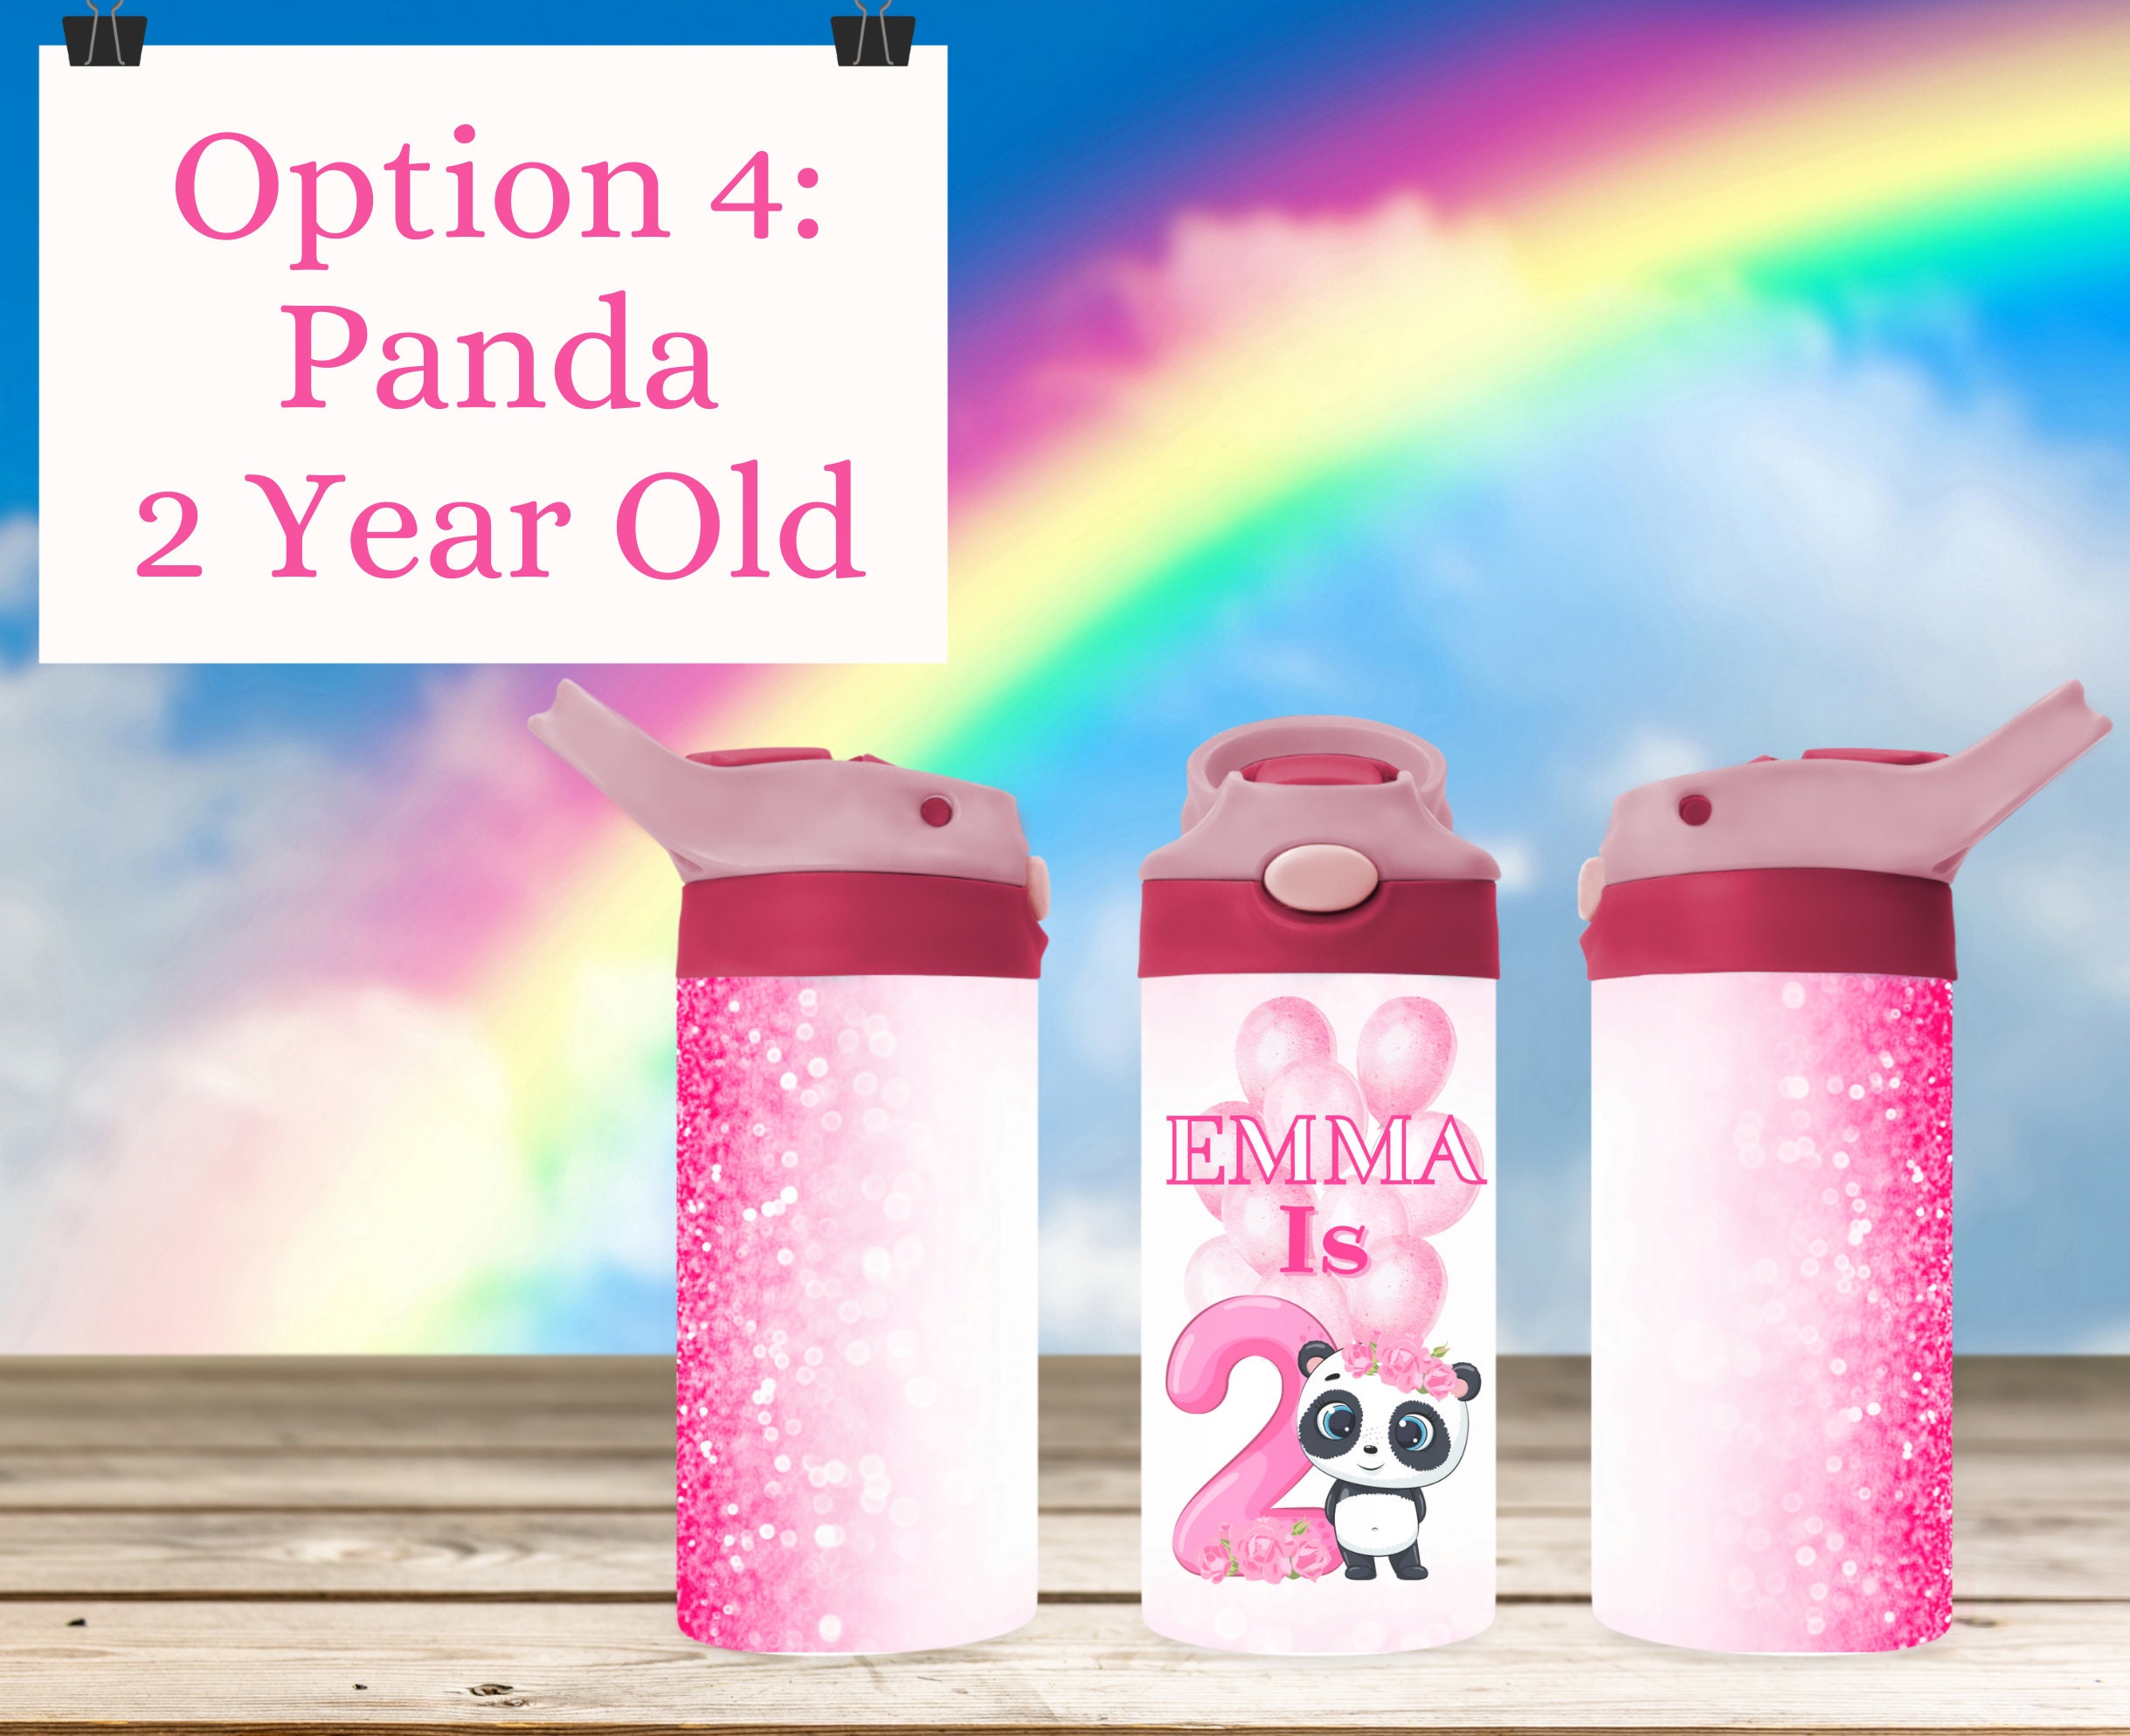 Personalized Birthday Cup for Children Birthday Water Bottle 